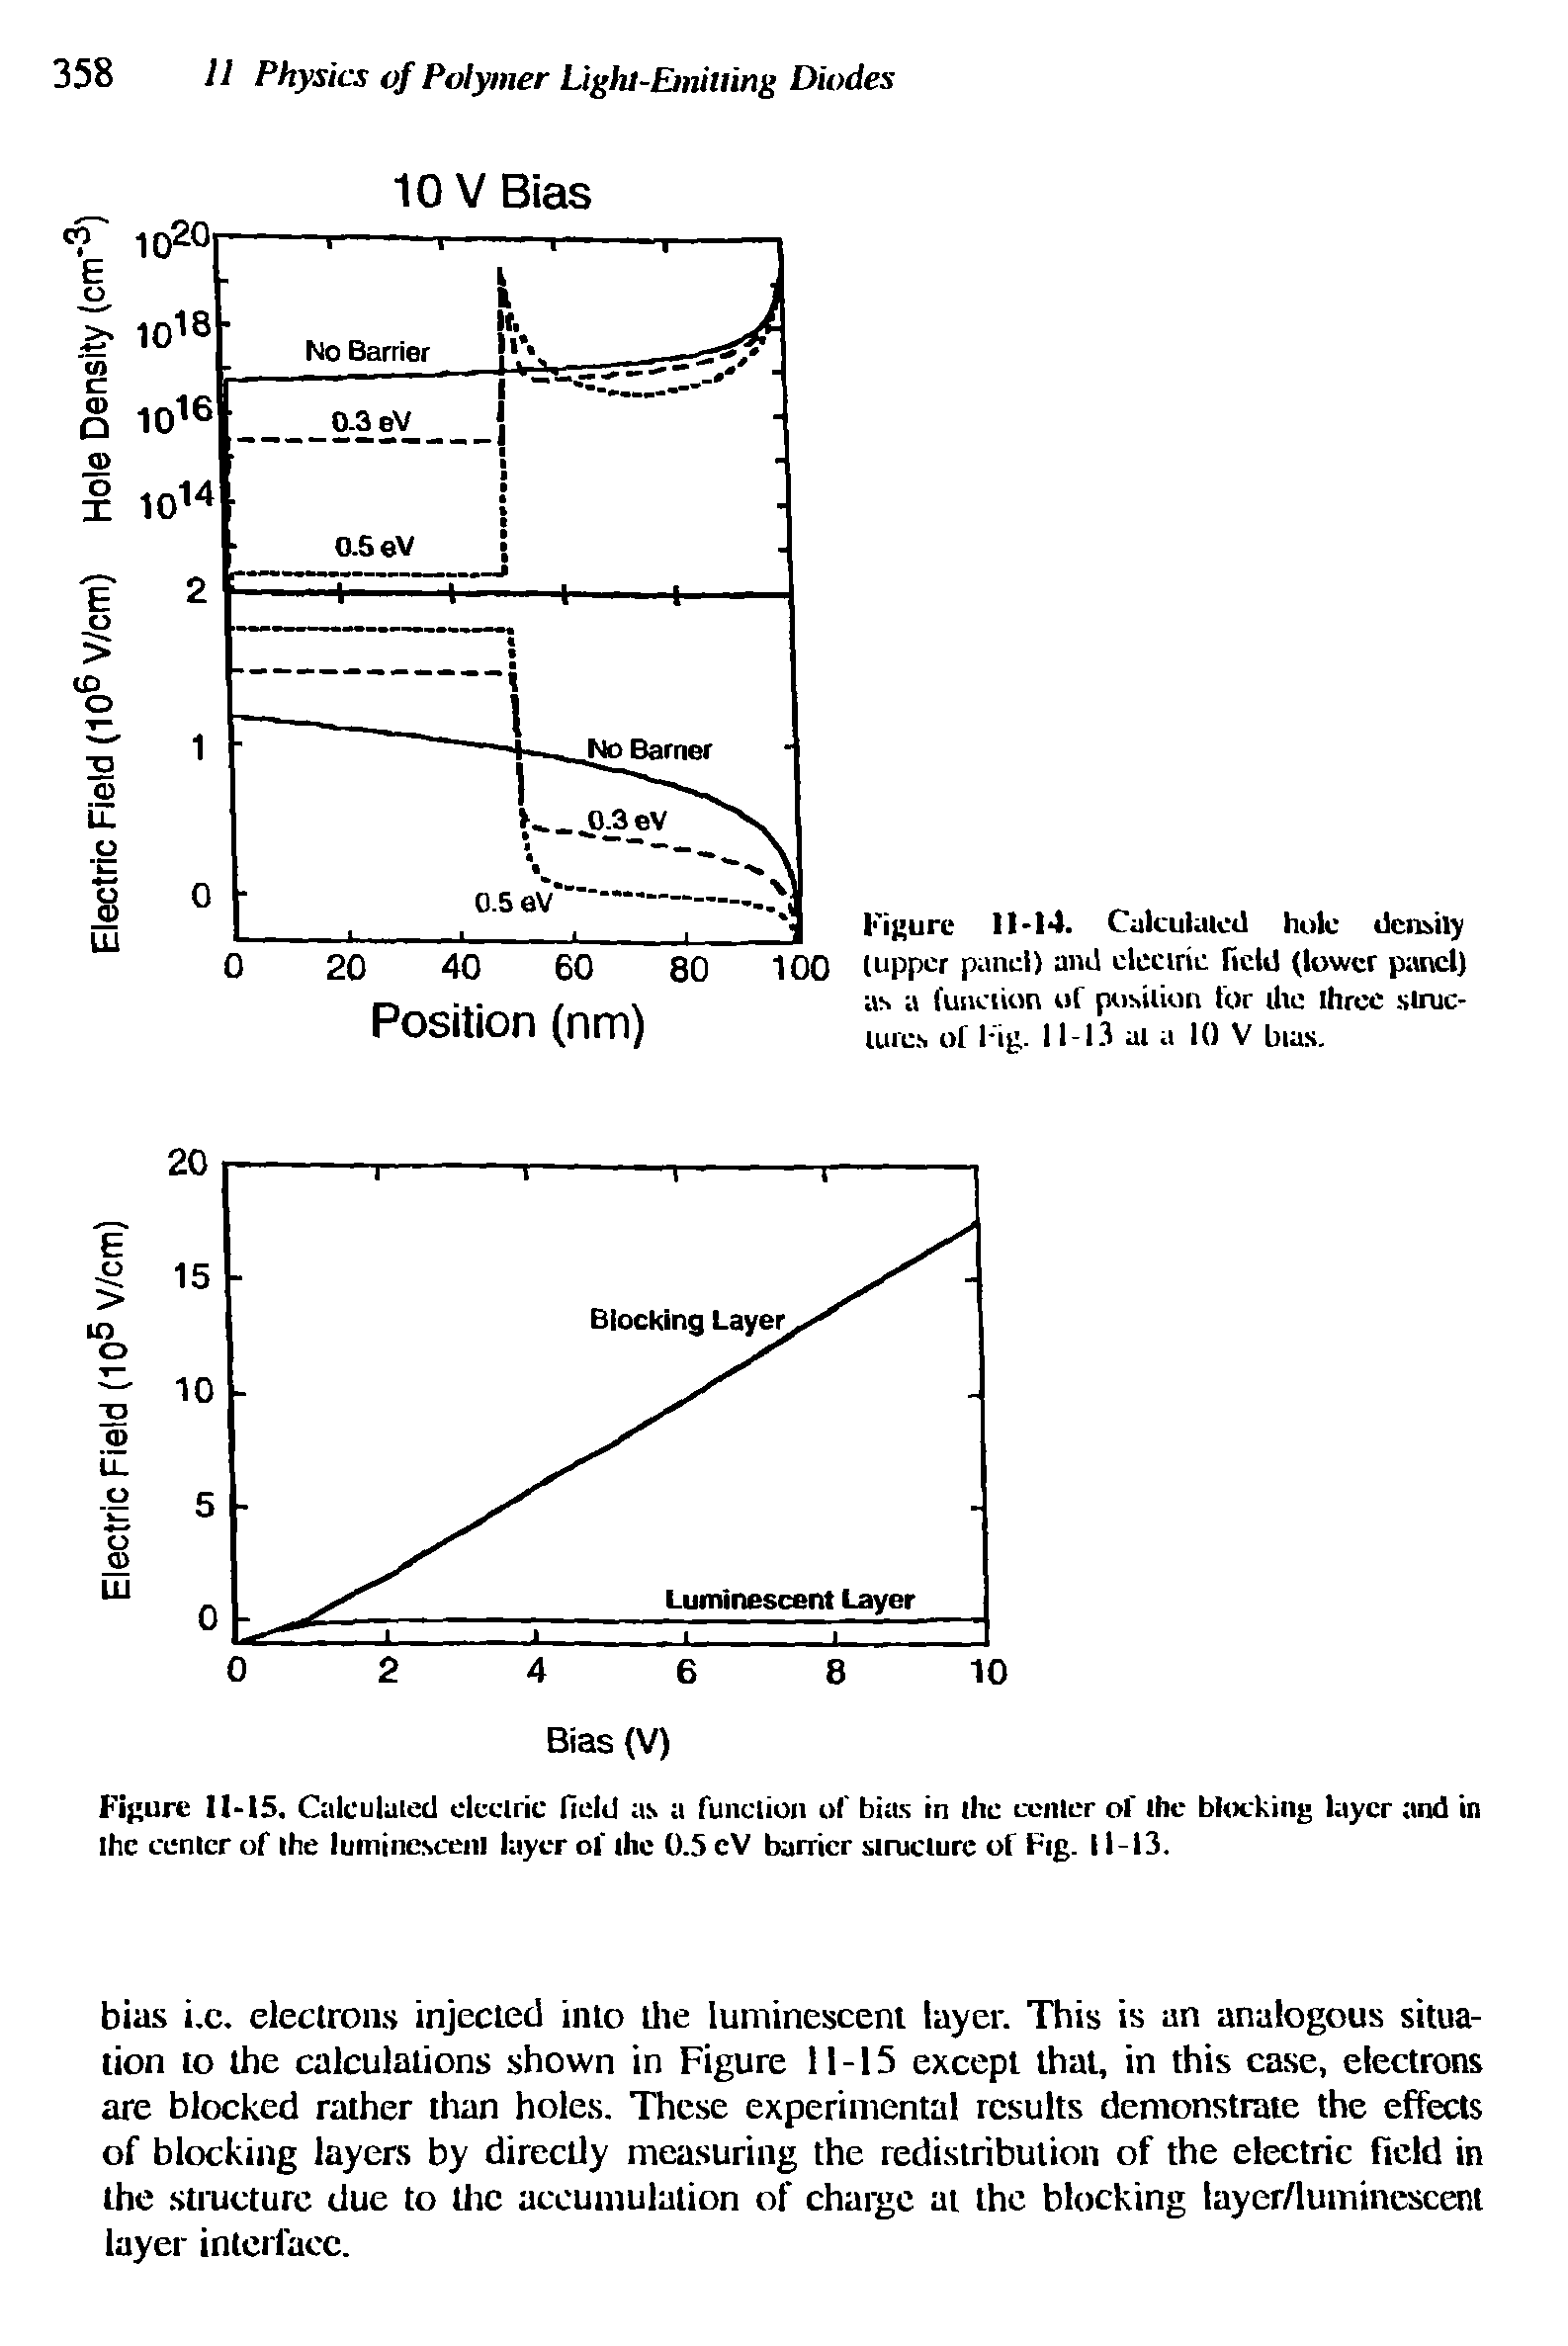 Figure 11-15. Calculated electric field as a function of bias in the center of the blocking layer and in Ihc center of the luminescent layer of the 0.5 cV barrier structure of Fig. 11-13.